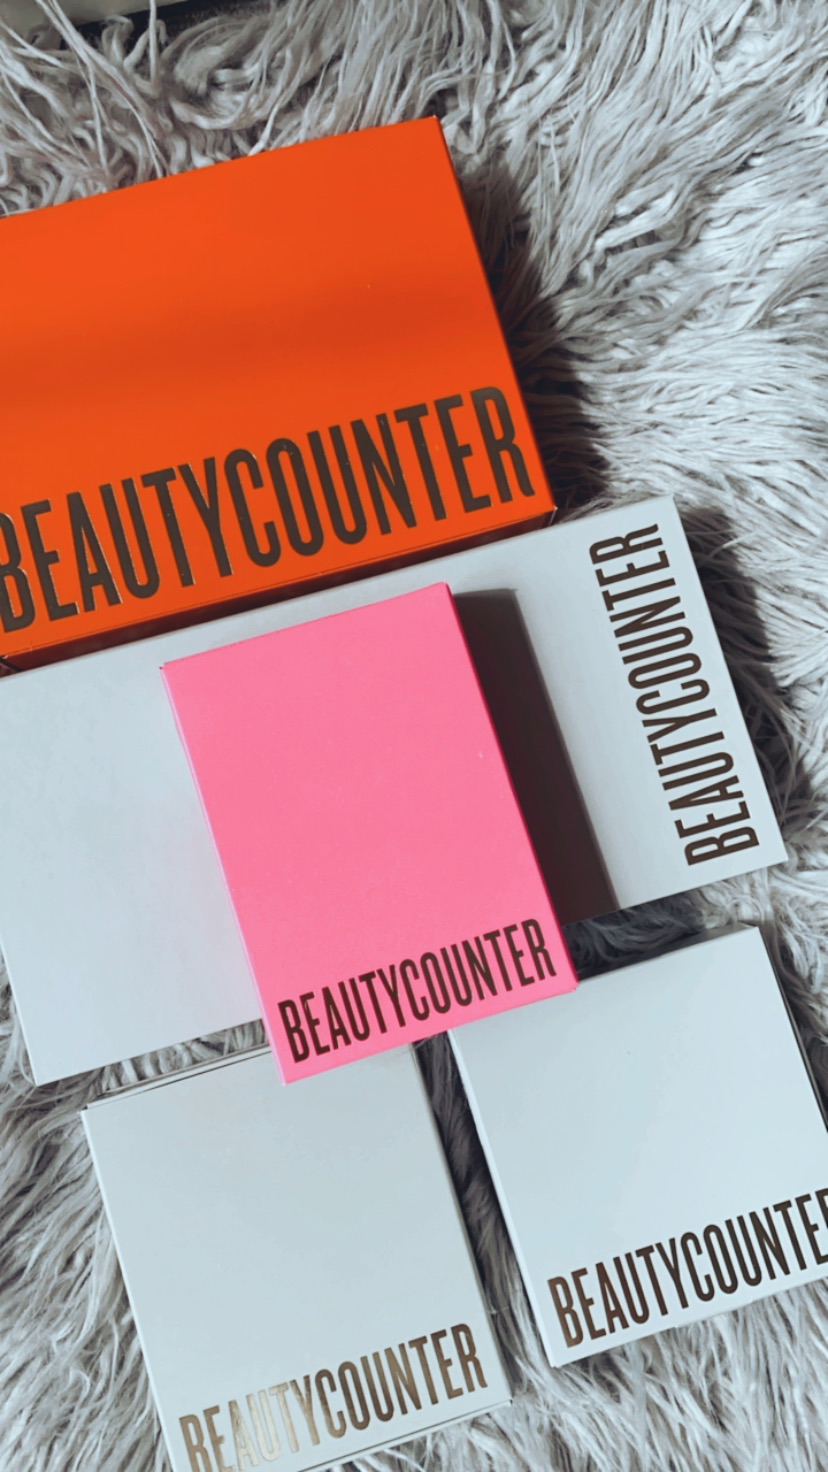 Beautycounter holiday 2021, festive, limited-edition makeup, skin-care, and self-care sets that are as covetable as they are clean. Colorful holiday gift boxes, clean beauty gifts, gifts for mom